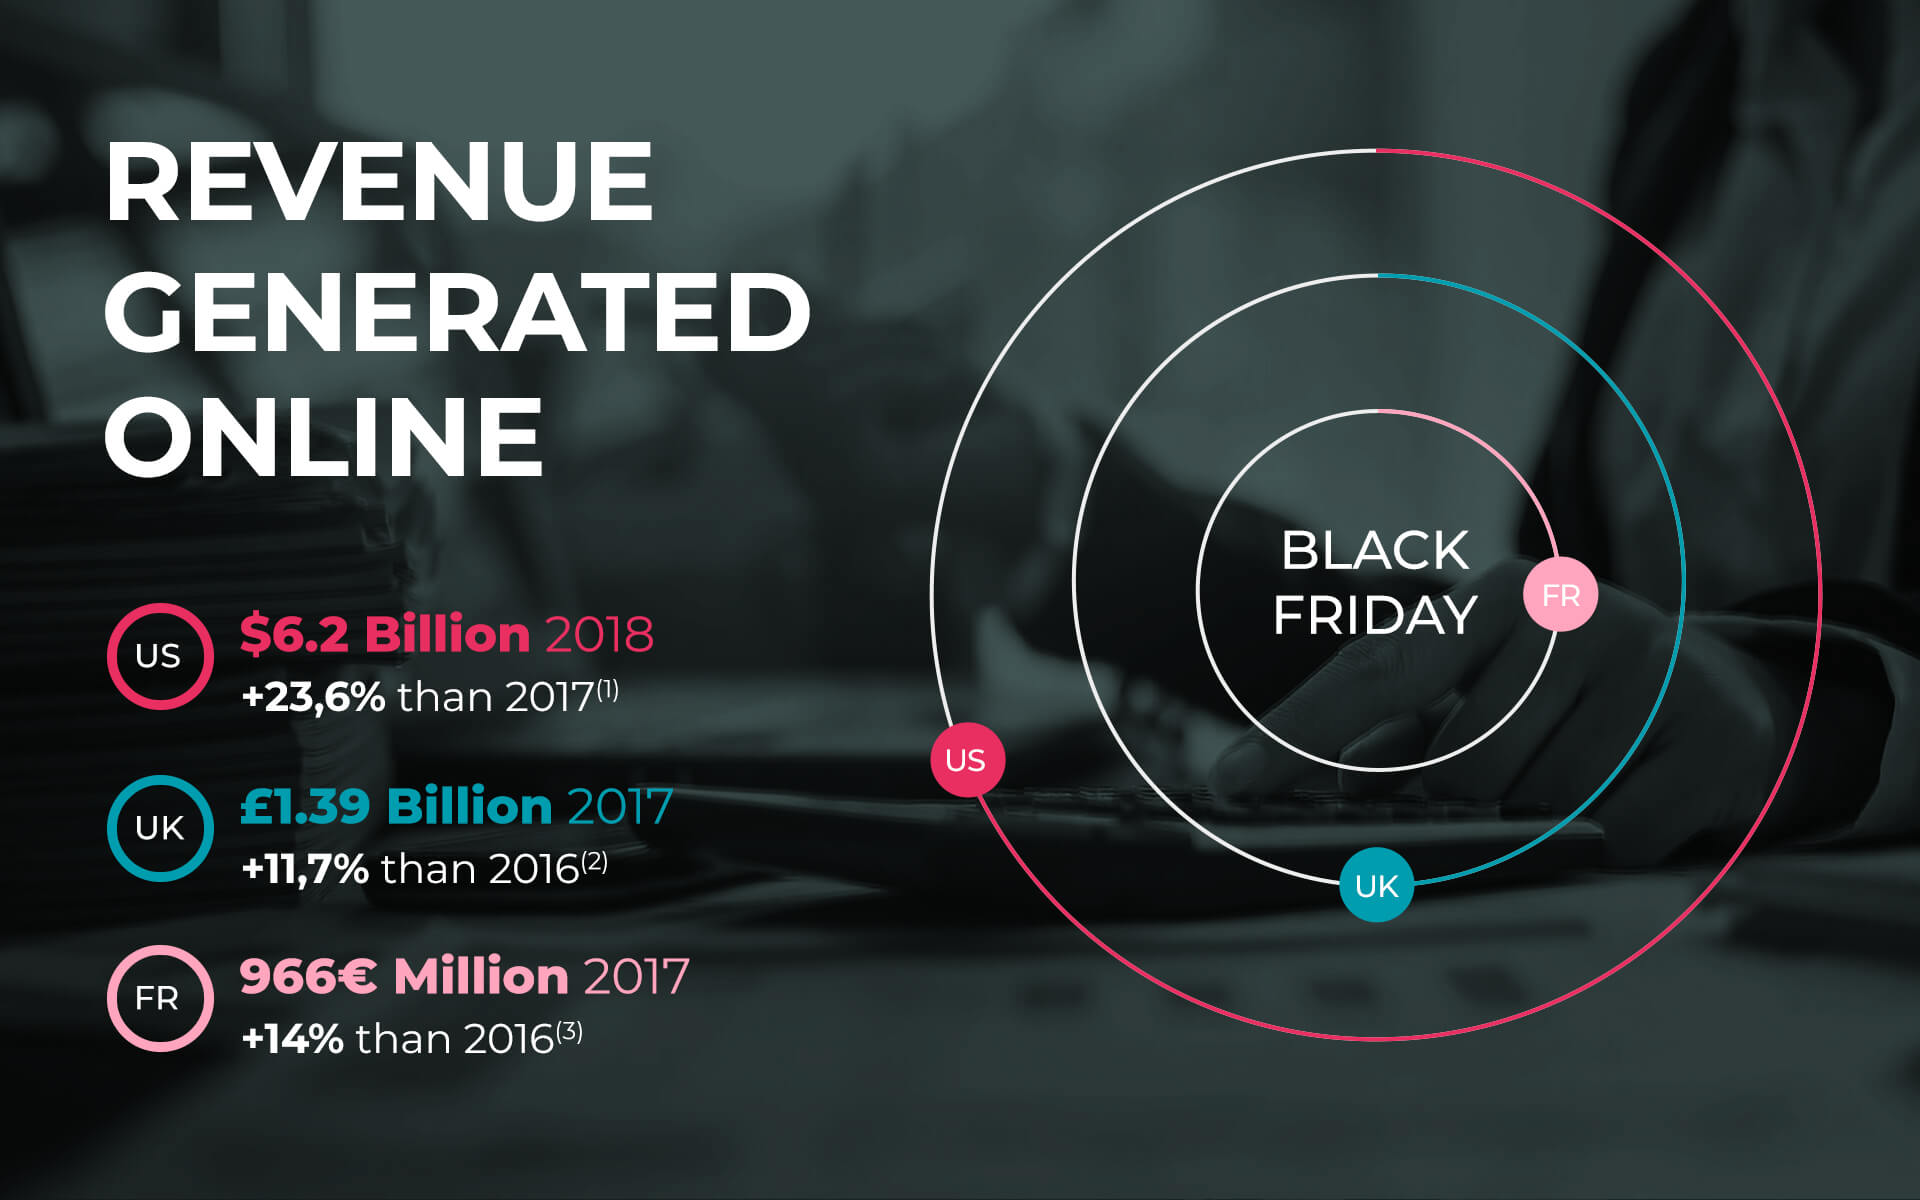 REVENUE GENERATED ONLINE ON BLACK FRIDAY. US IN 2018: $6.2 BILLION, +23,6% COMPARE TO PREVIOUS. UK IN 2017: £1.39 BILLION, +11,7% COMPARE TO PREVIOUS YEAR. FR IN 2017: 966€ MILLION, +14% COMPARE TO PREVIOUS YEAR.